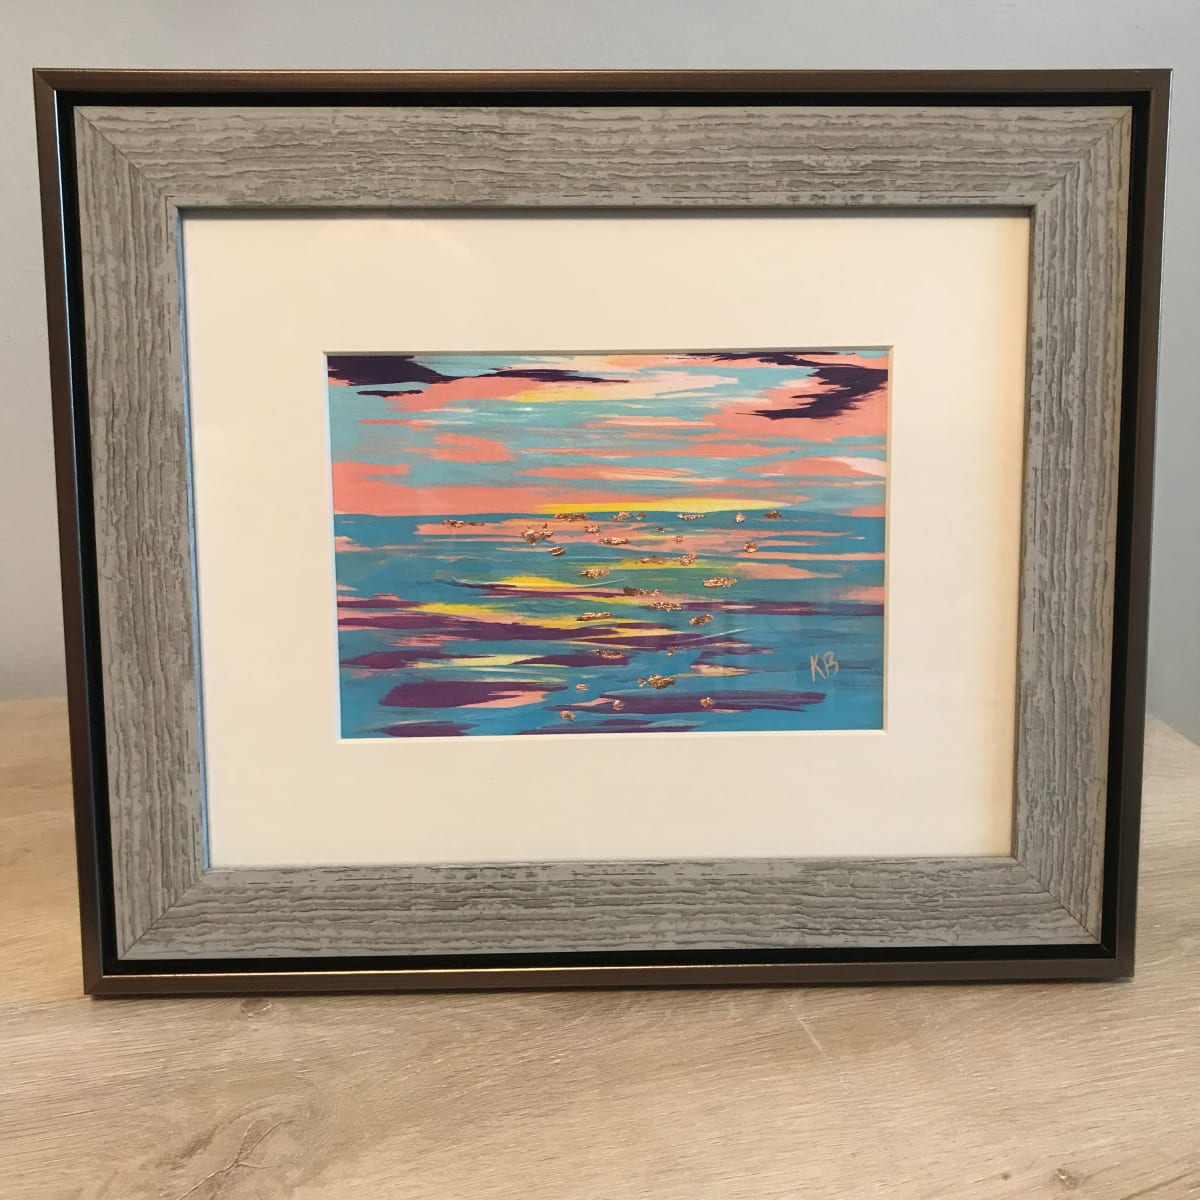 Where The Sky Meets The Sea No. 17 by Colorvine by Kelsey 